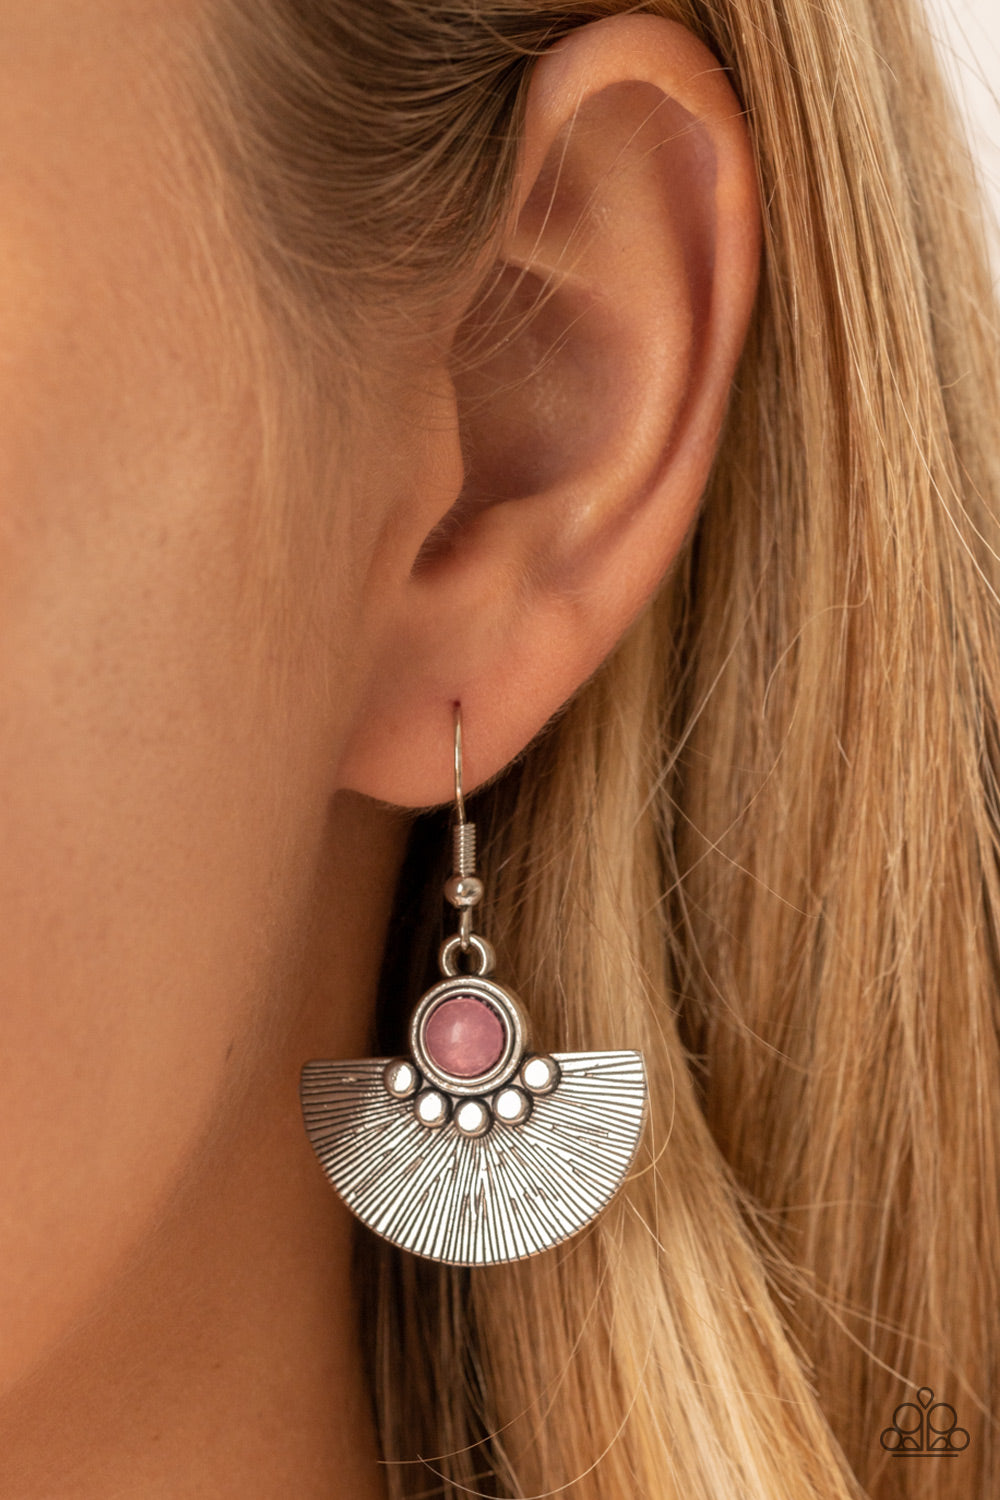 Manifesting Magic - Pink and Silver Earrings- Paparazzi Accessories